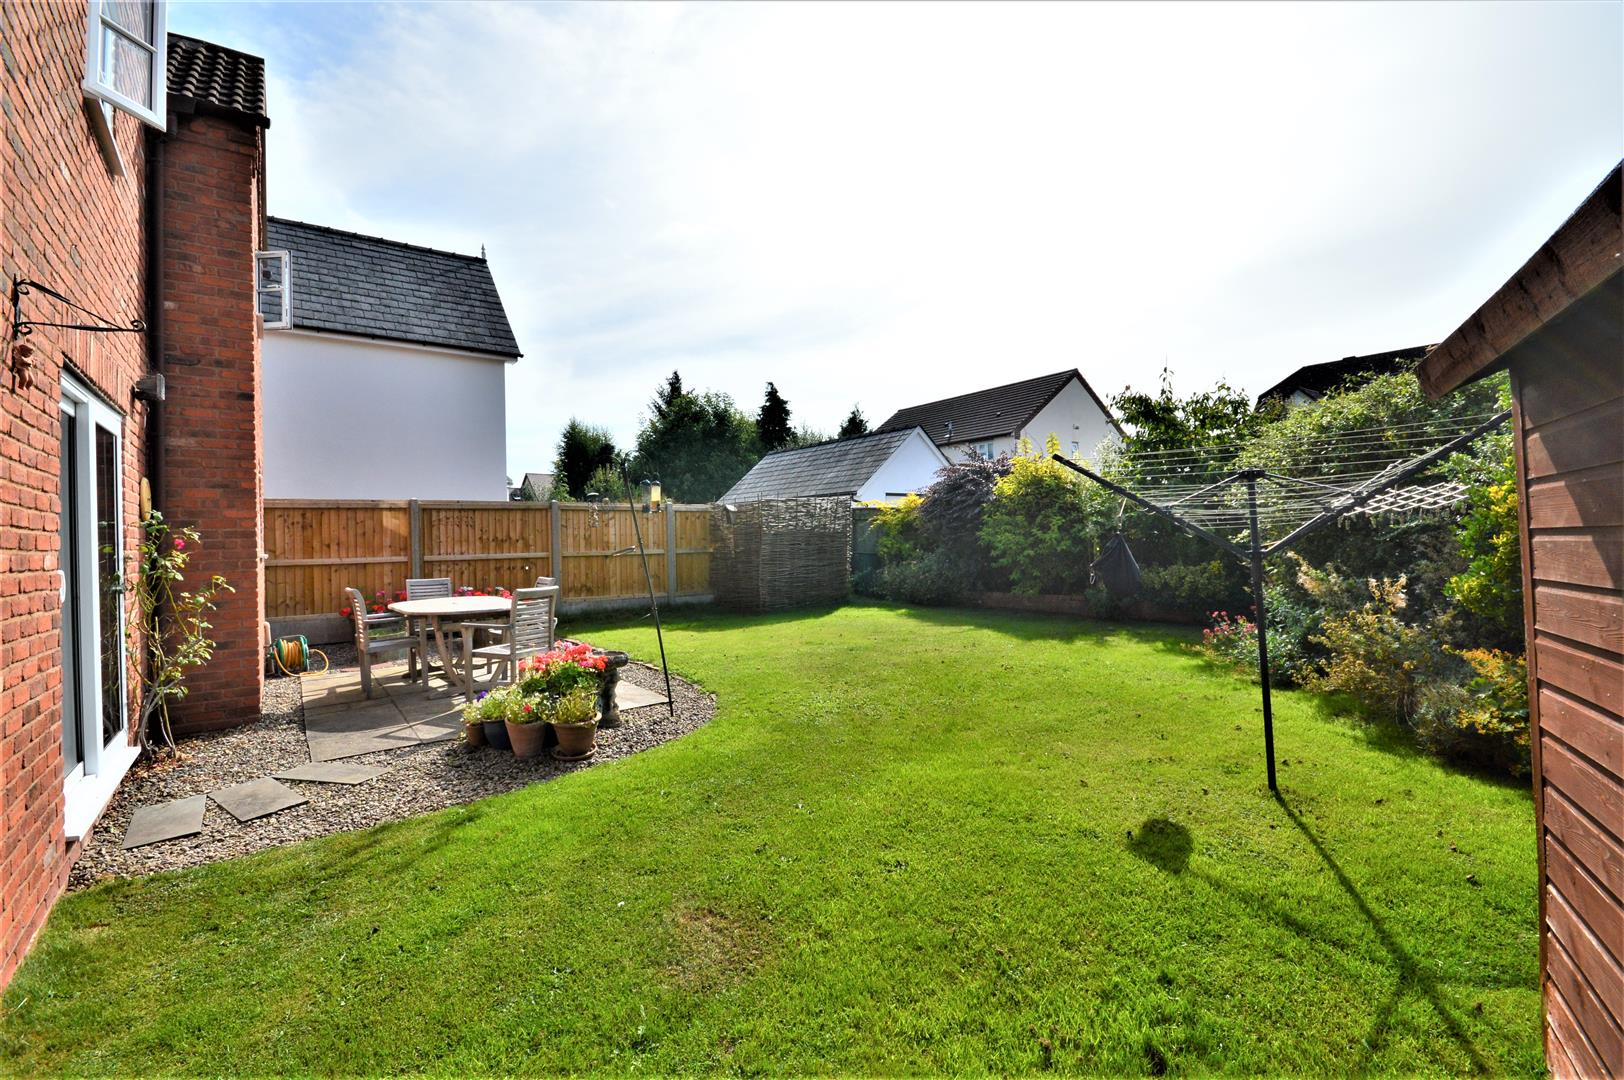 4 bed detached for sale in Staunton-On-Wye 21